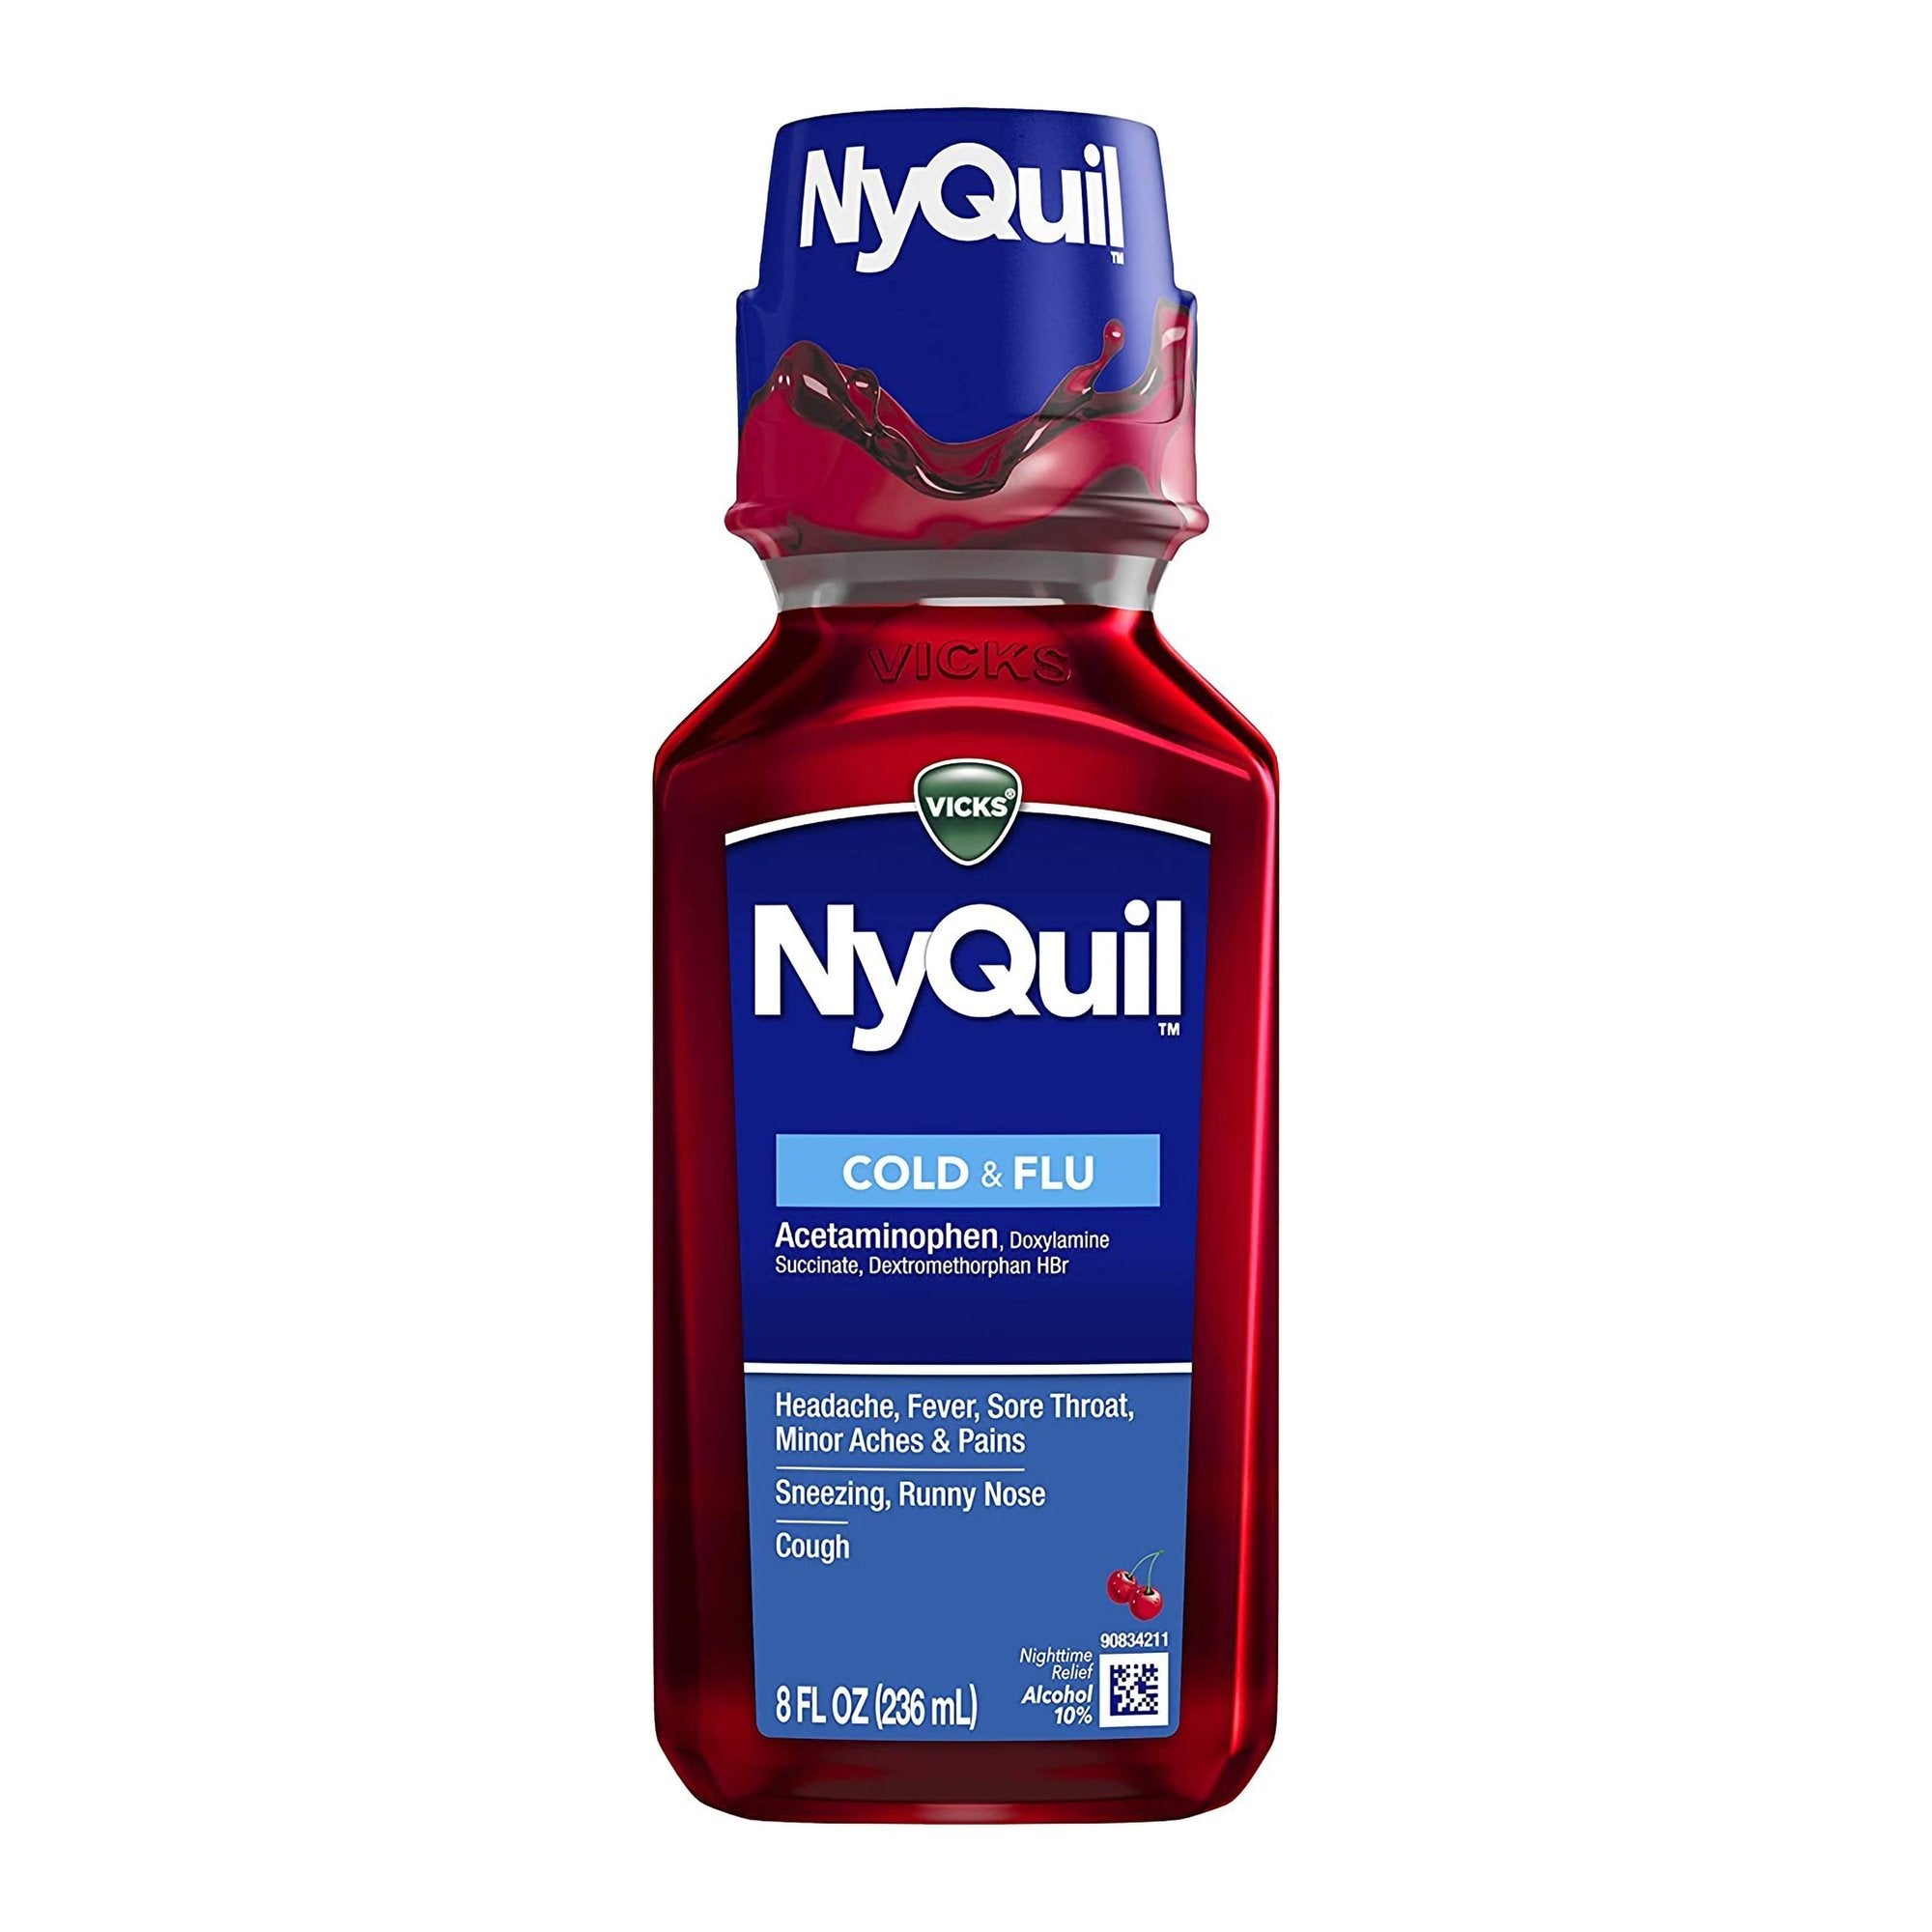 Cold and Cough Relief NyQuil® Cold & Flu 650 mg - 30 mg - 12.5 mg / 30 mL Strength Liquid 8 oz.